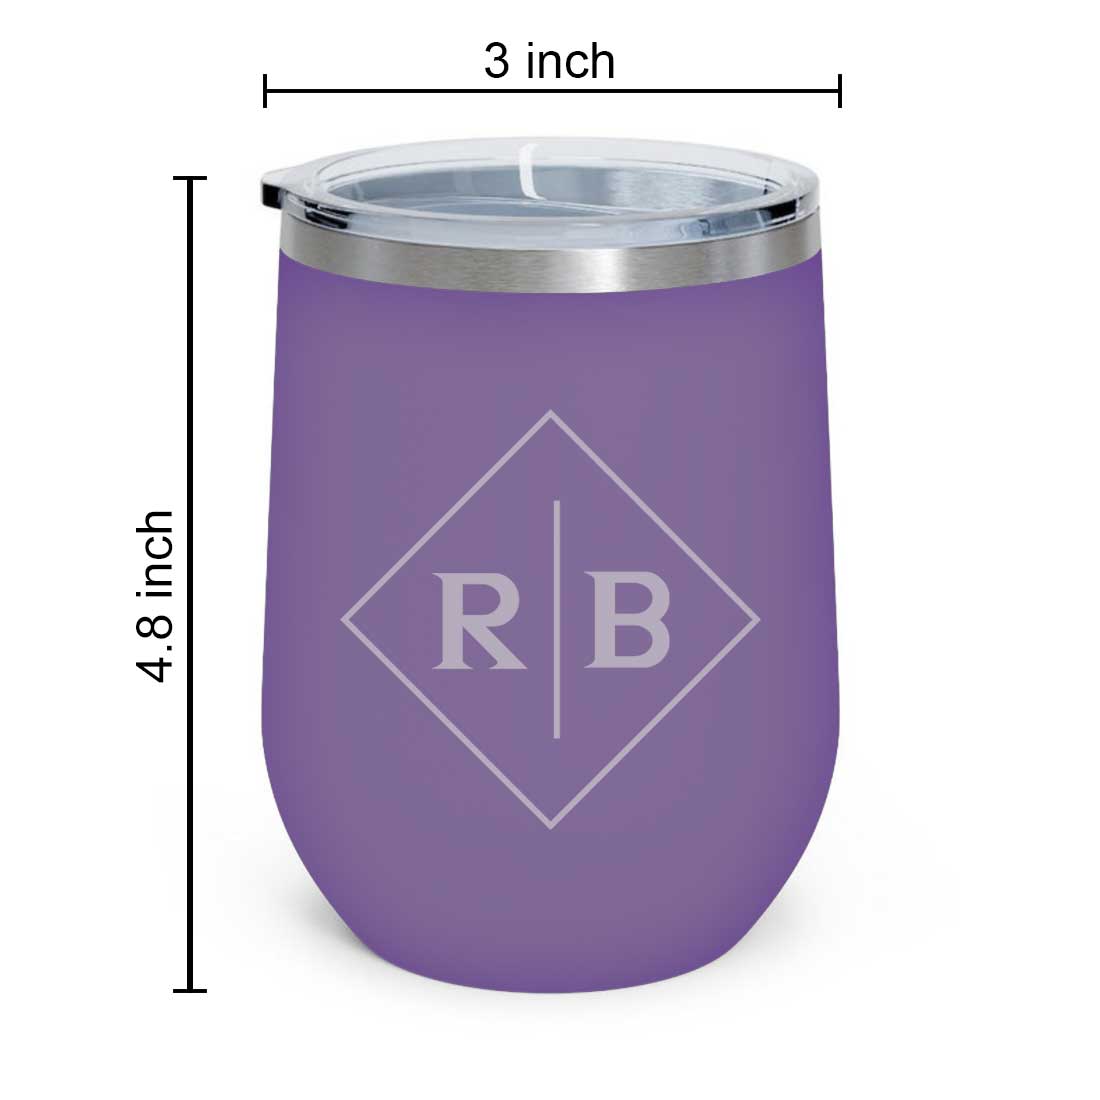 Engraved Personalized Coffee Tumbler Mug With Lid for Travel (350 ML) - Initials